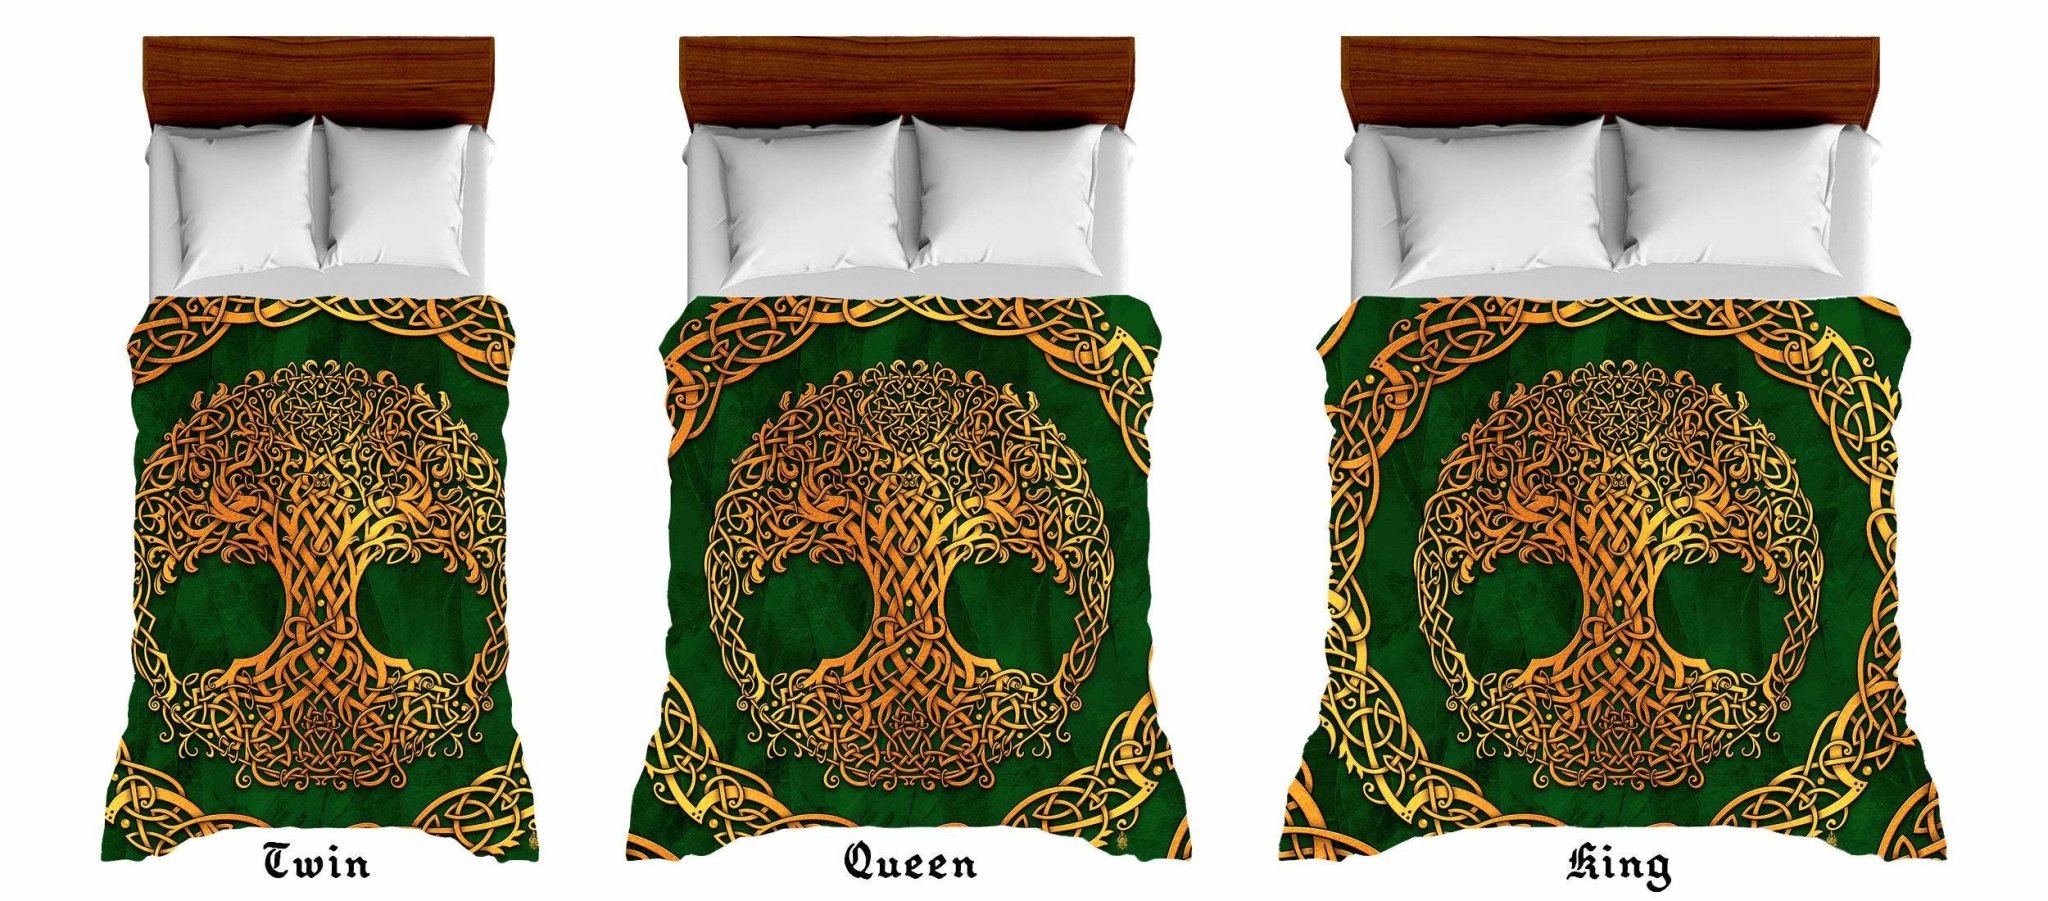 Tree of Life Bedding Set, Comforter and Duvet, Indie Bed Cover, Witchy Bedroom Decor King, Queen and Twin Size - Celtic, Gold and Green - Abysm Internal